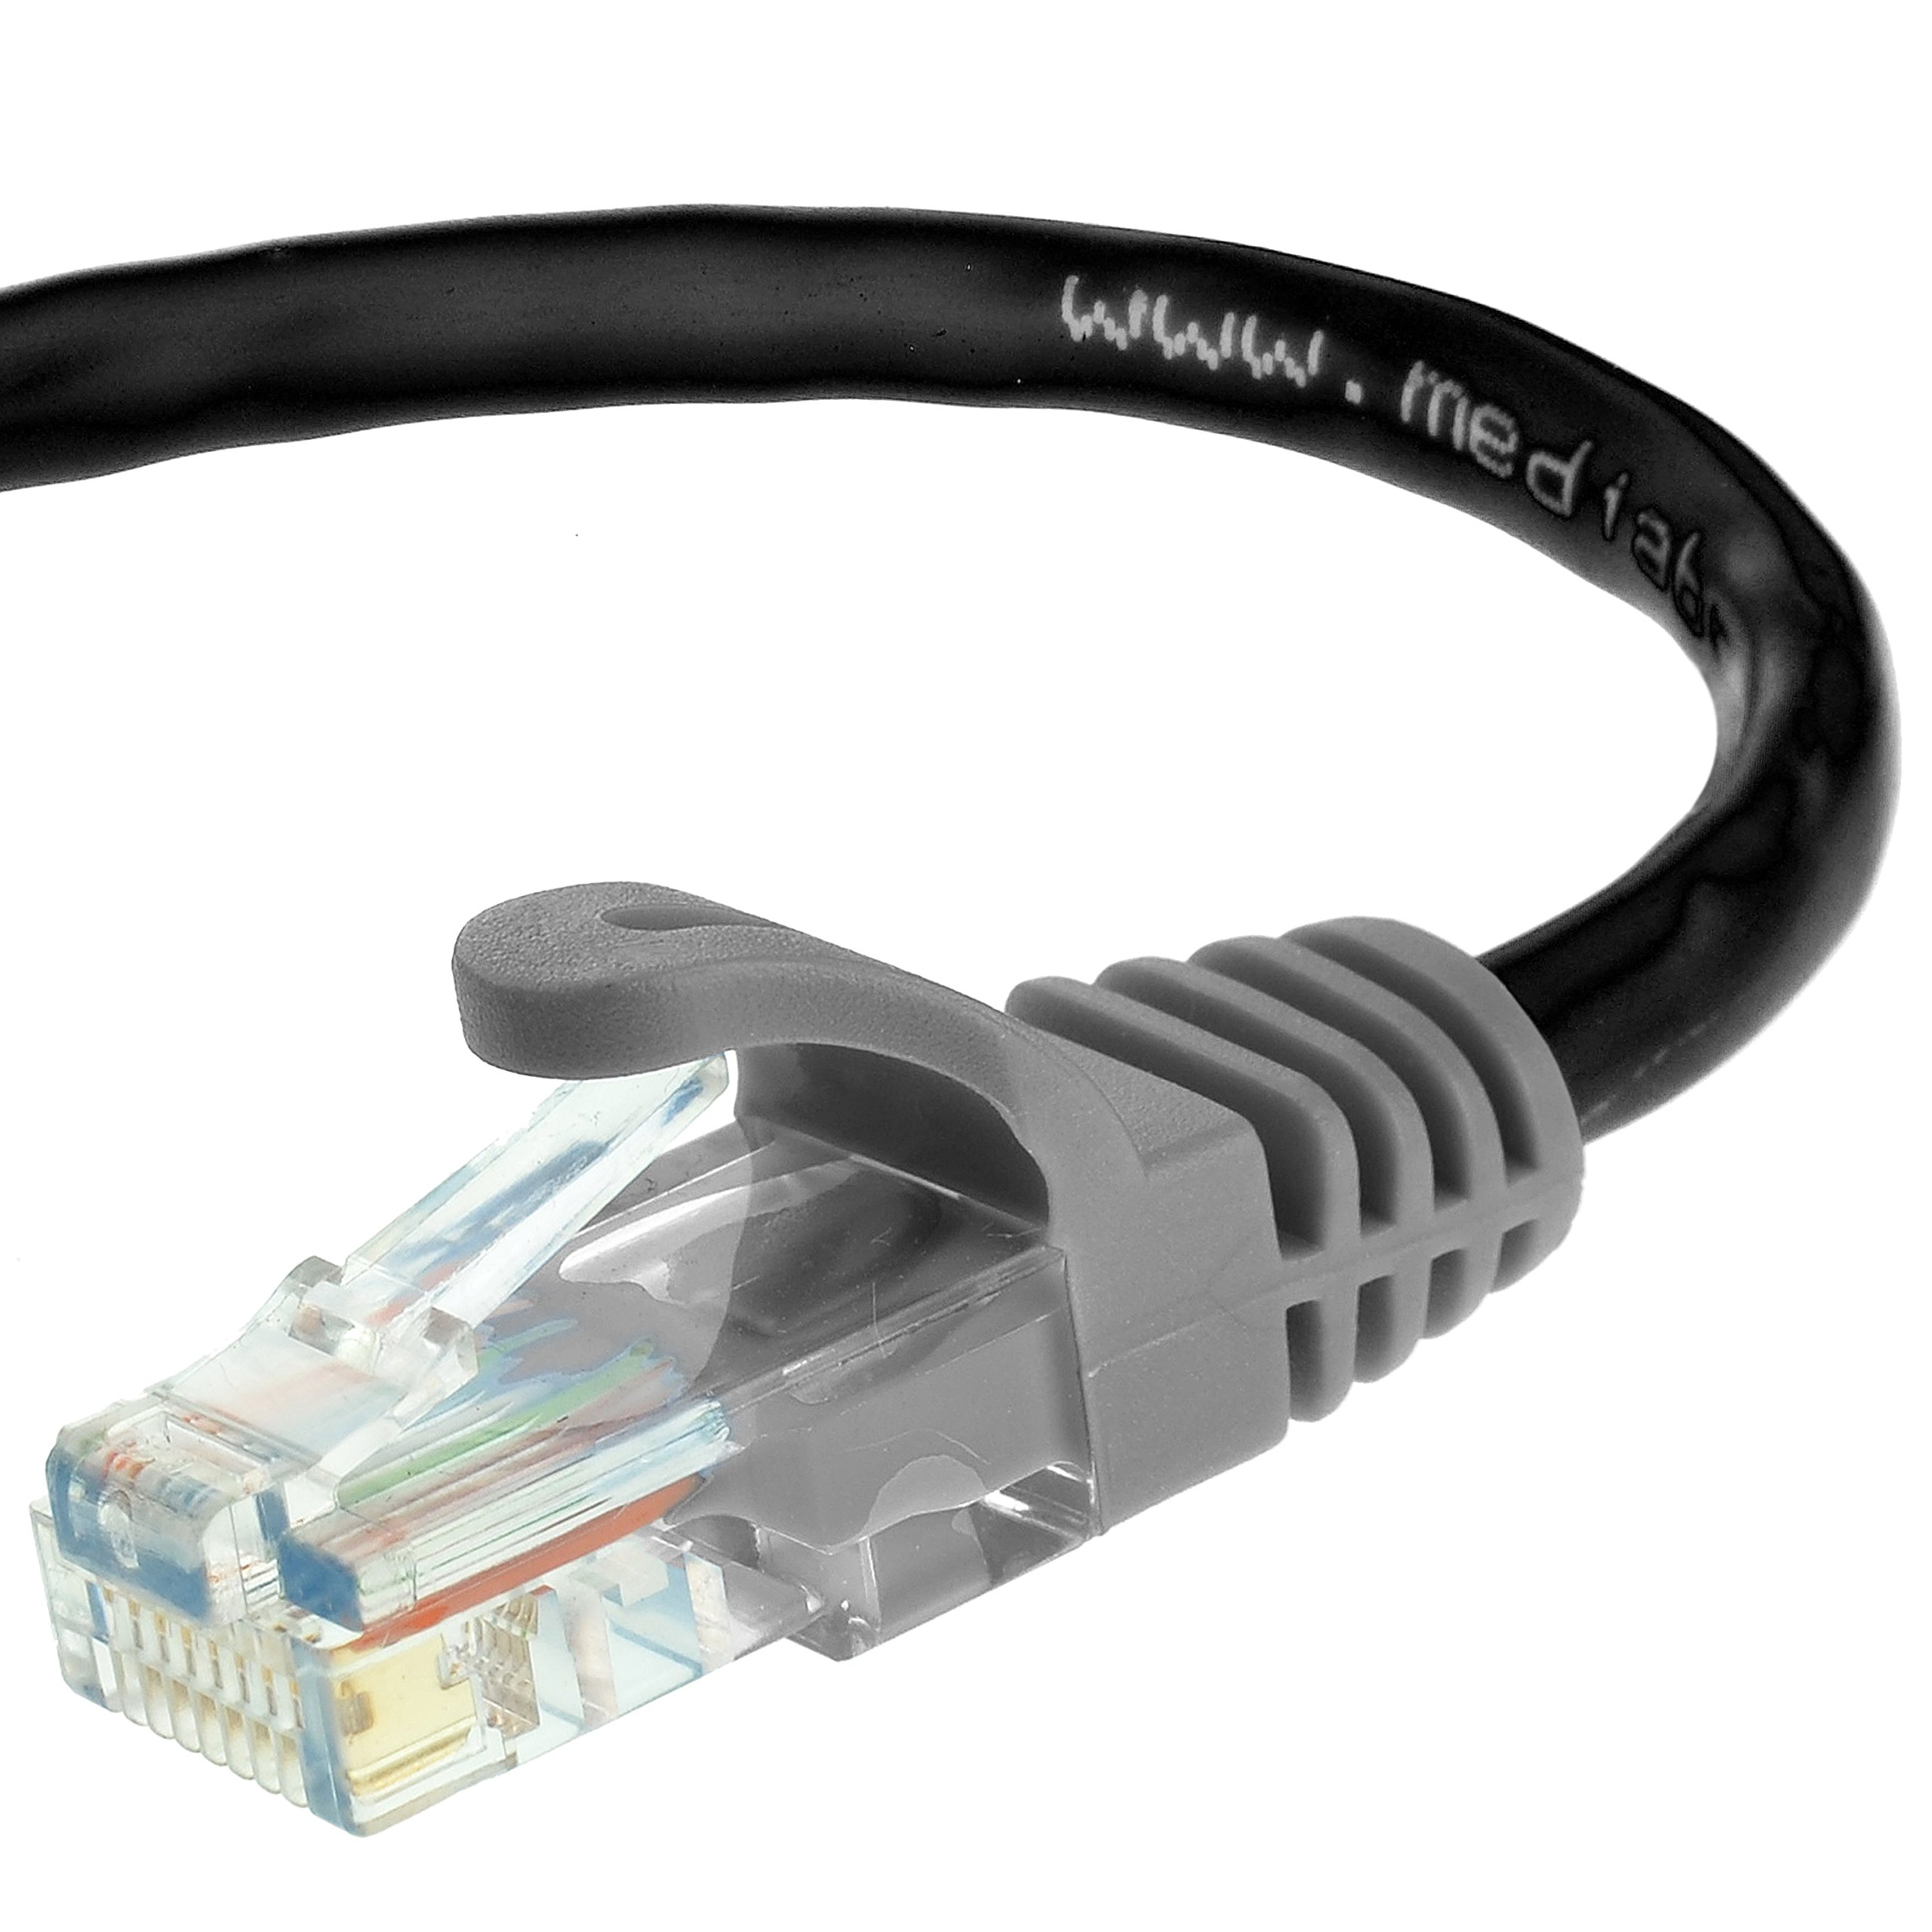 Mediabridge™ Ethernet Cable (15 Feet) - Supports Cat6 / Cat5e / Cat5 Standards, 550MHz, 10Gbps - RJ45 Computer Networking Cord (Part# 31-699-15B)